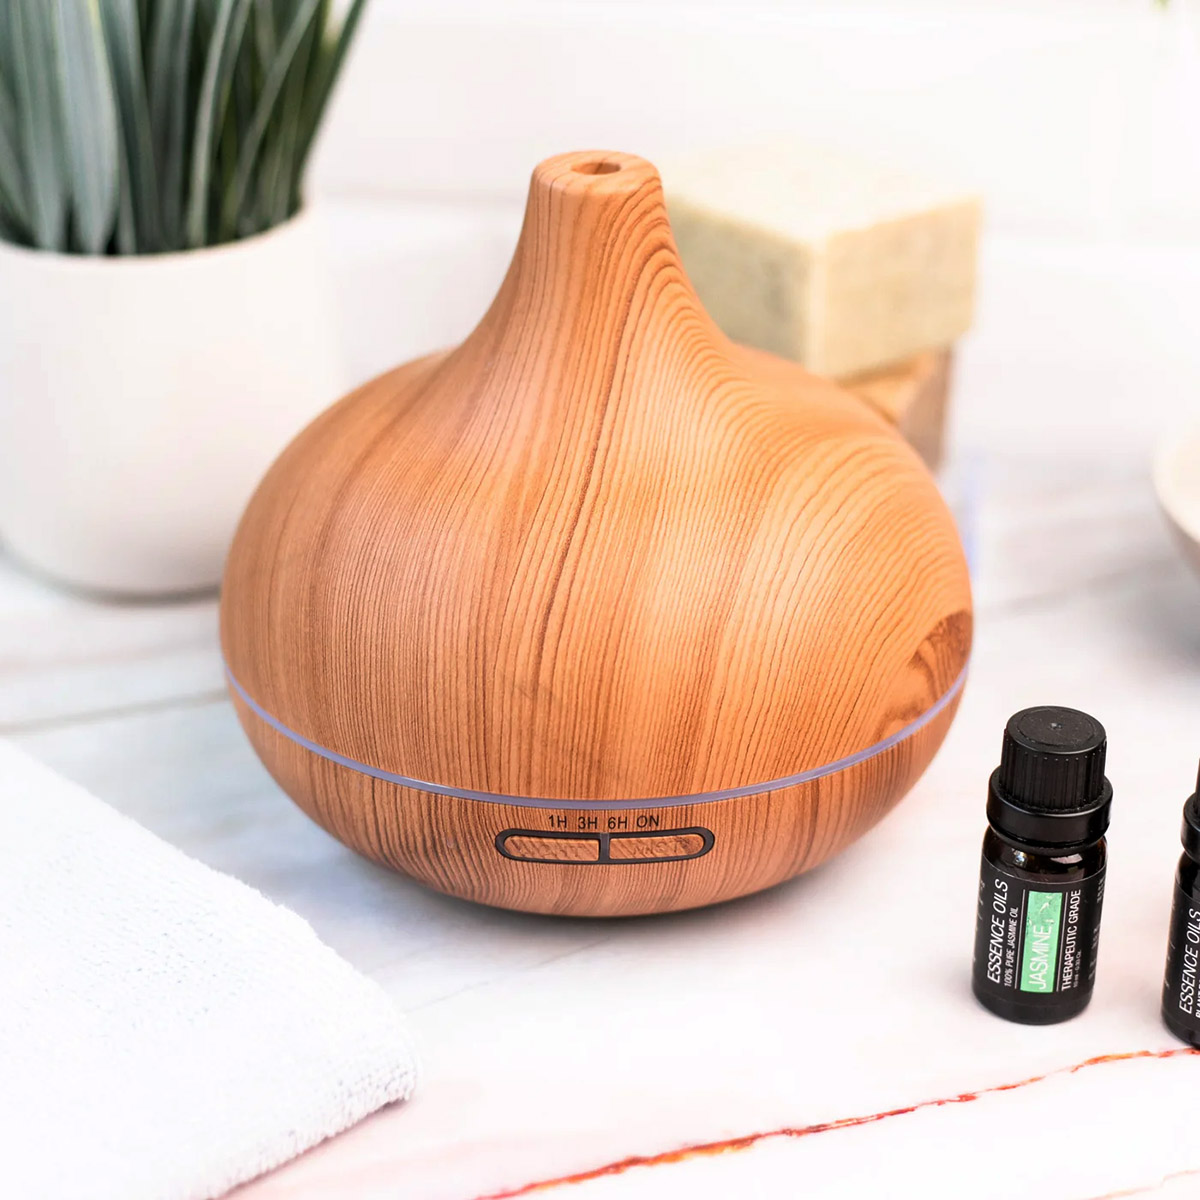 How Many Drops Of Essential Oil Should You Put In A Diffuser